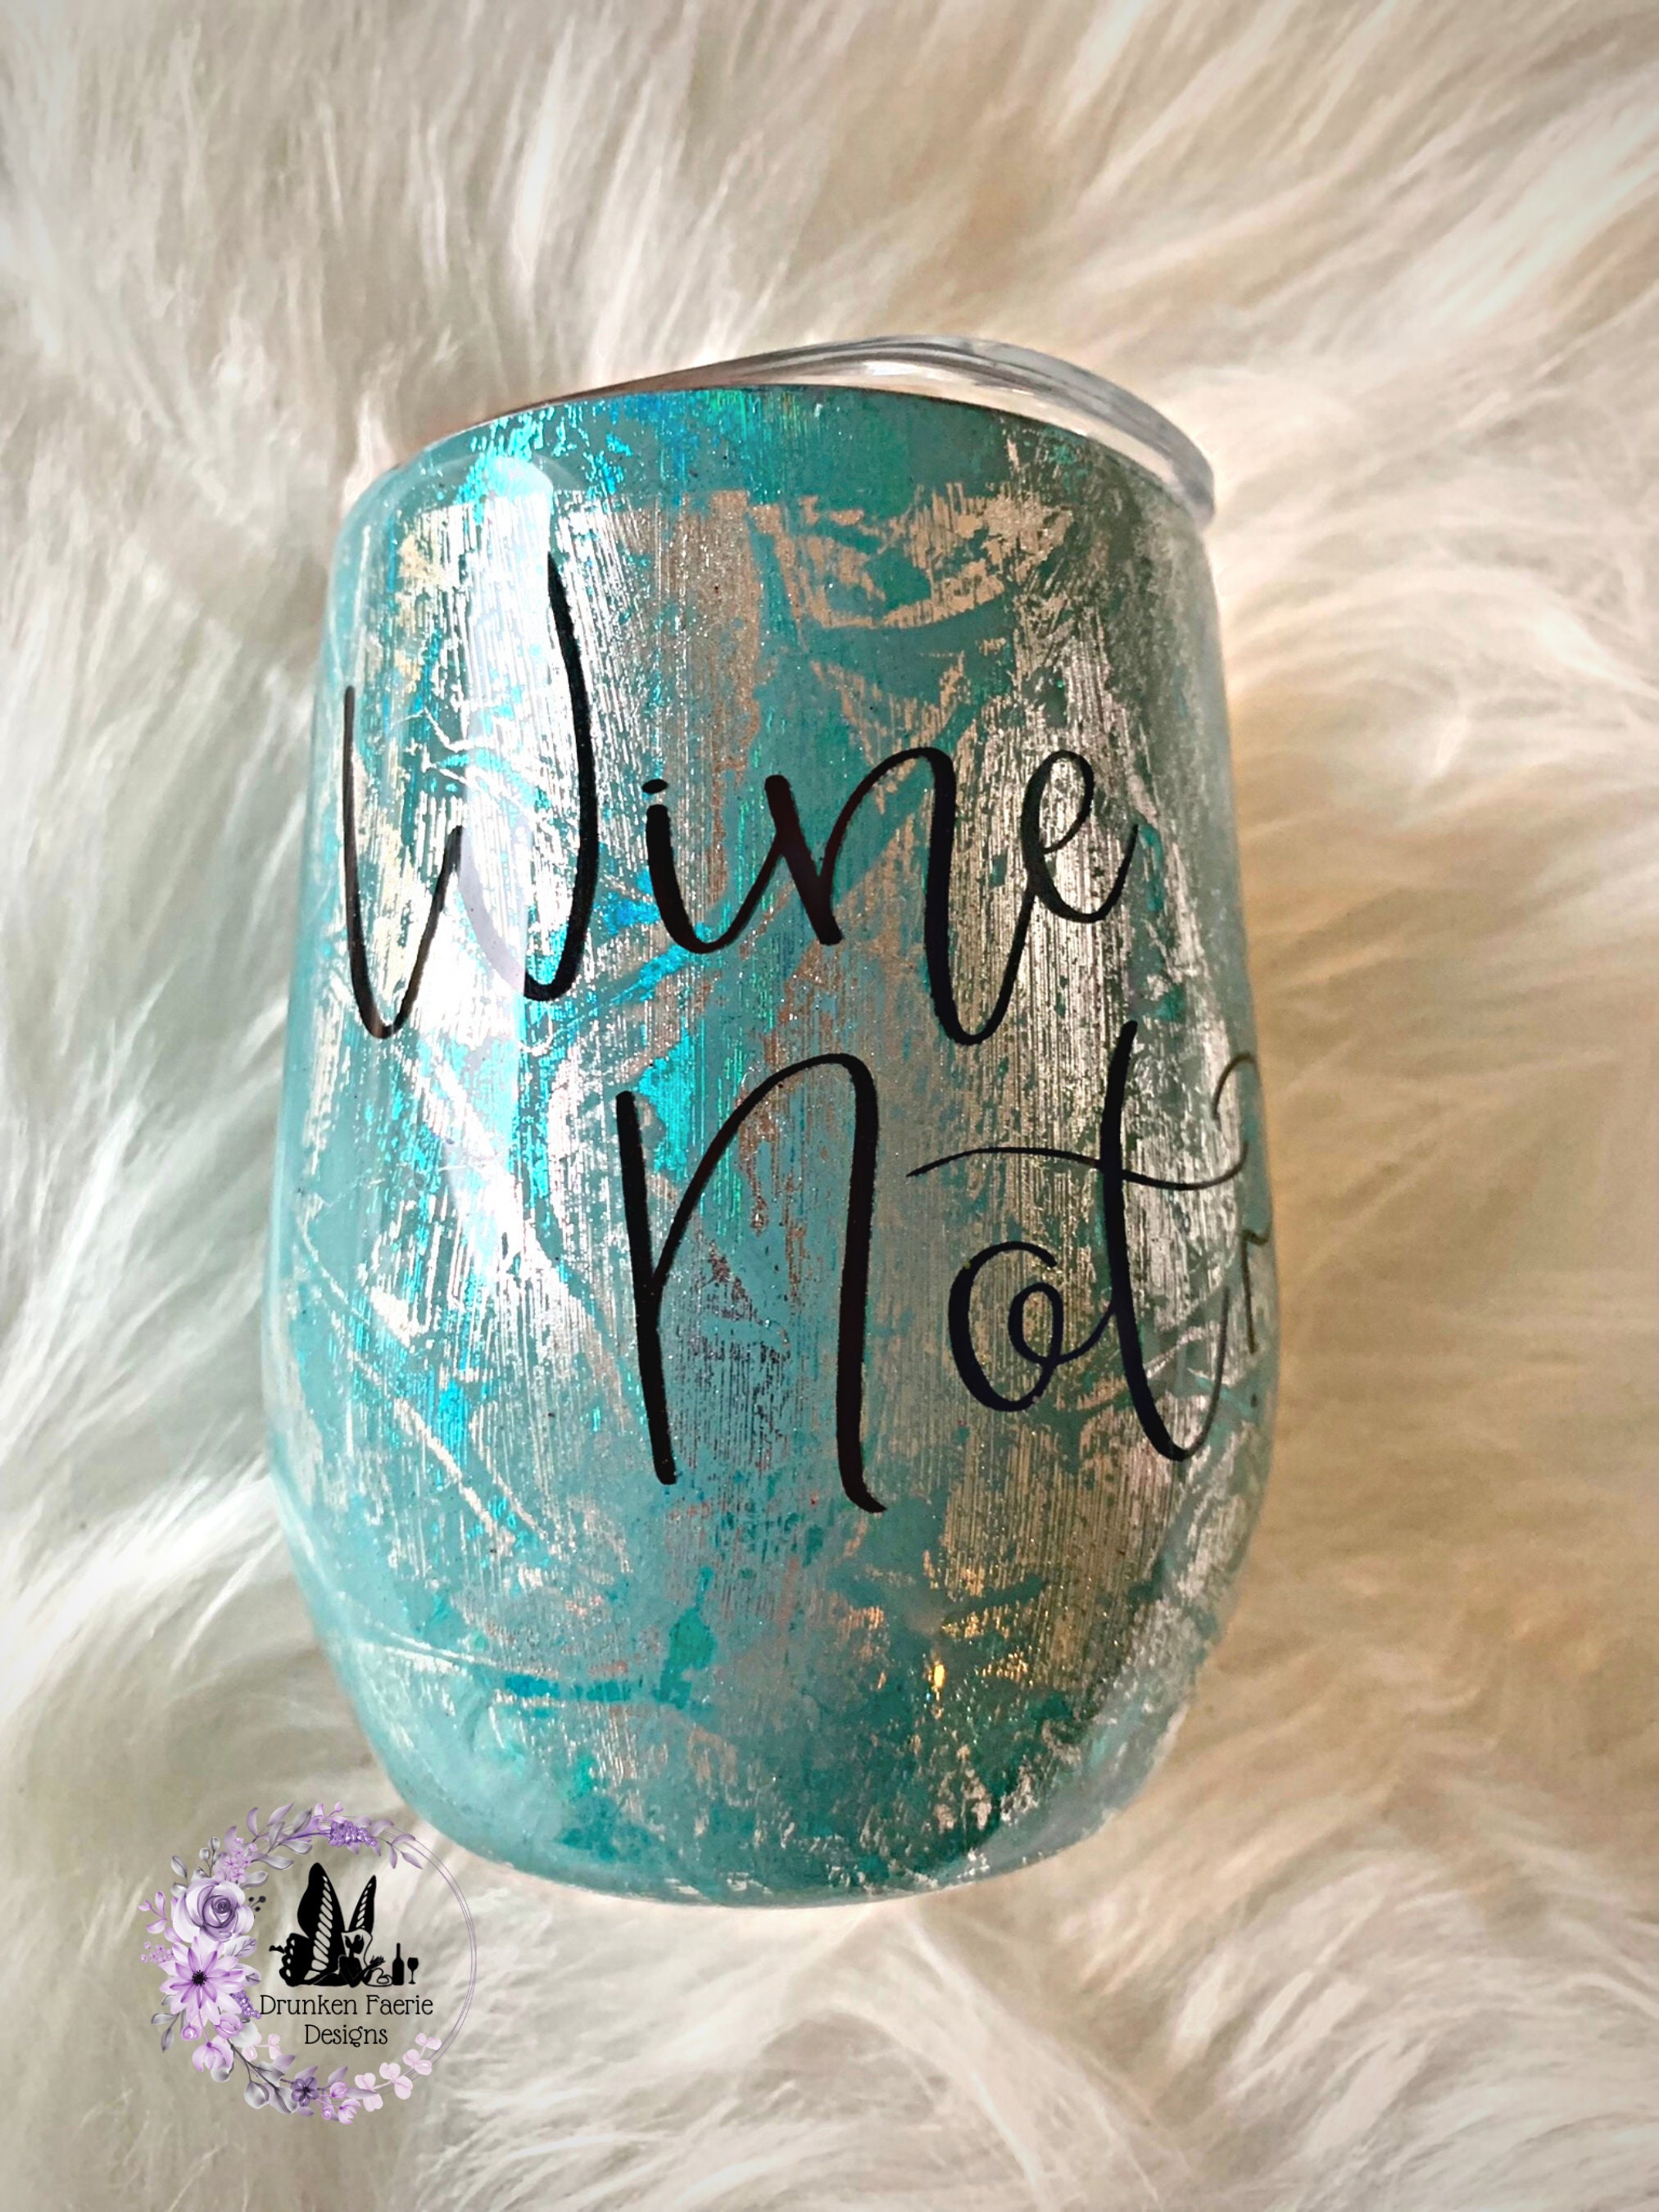 Wine Not? - Choose your cup color & create a personalized tumbler